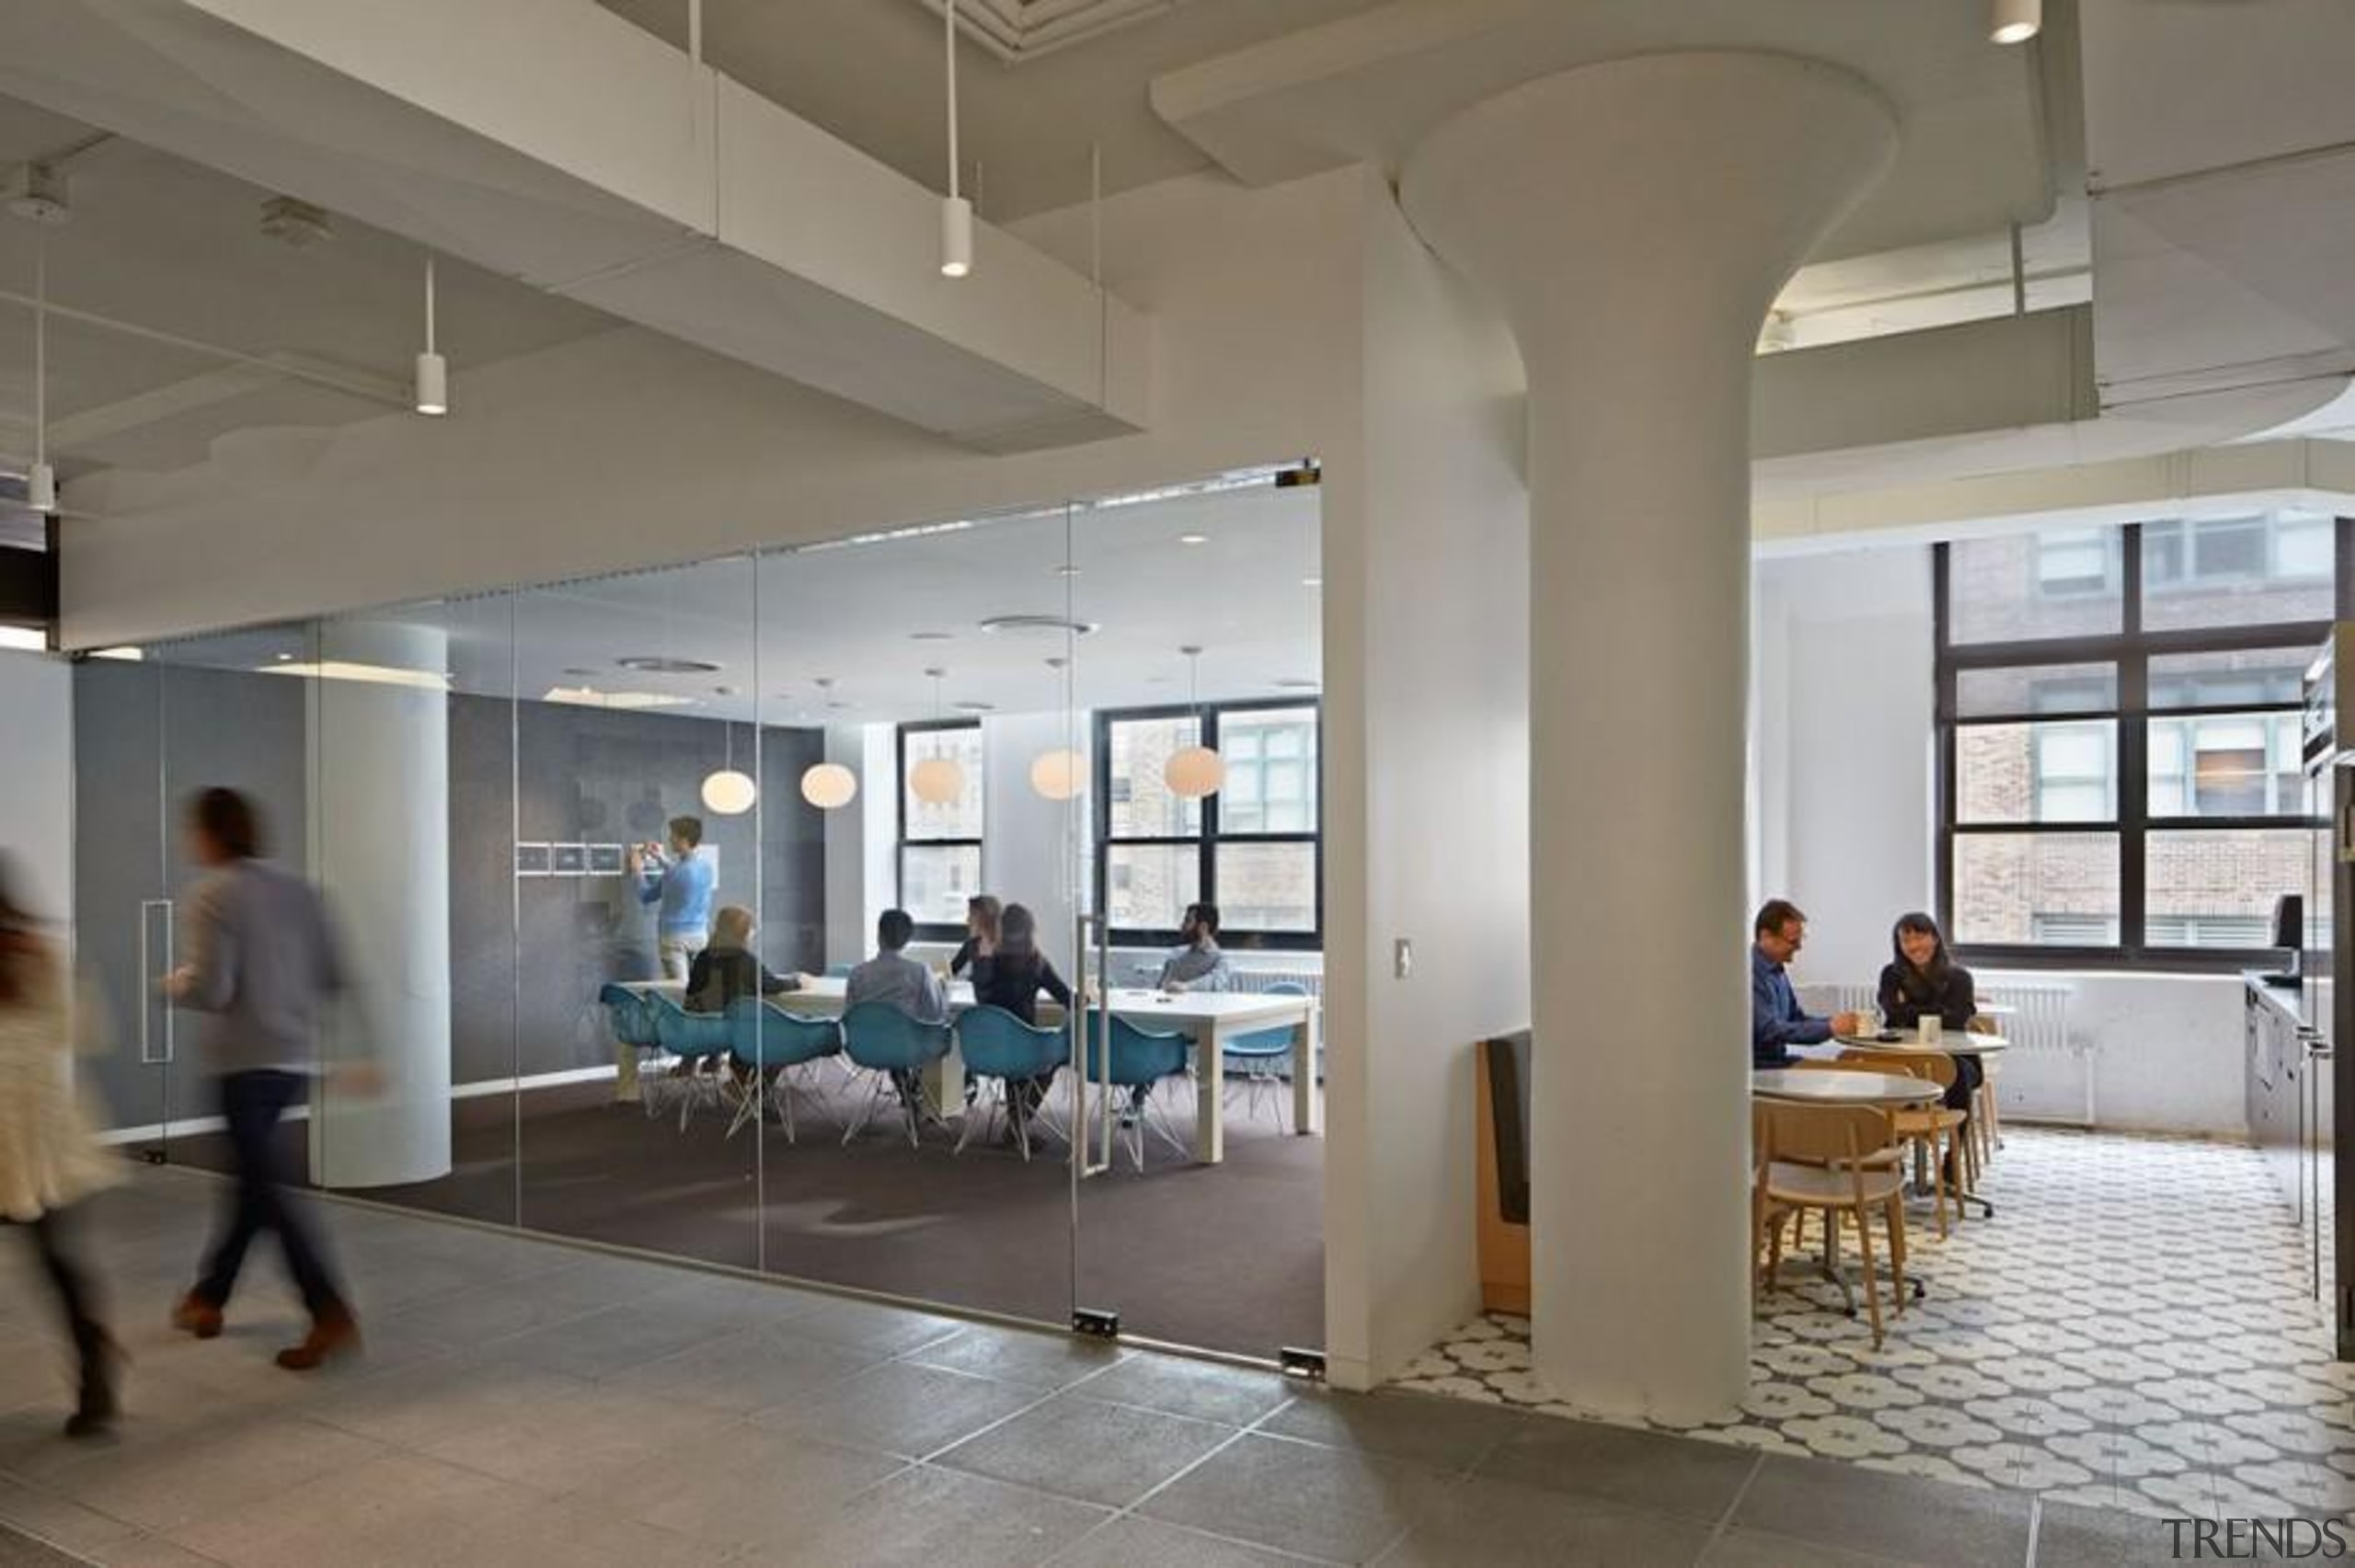 The design for renowned advertising agency Wieden+Kennedy moves ceiling, institution, interior design, lobby, gray